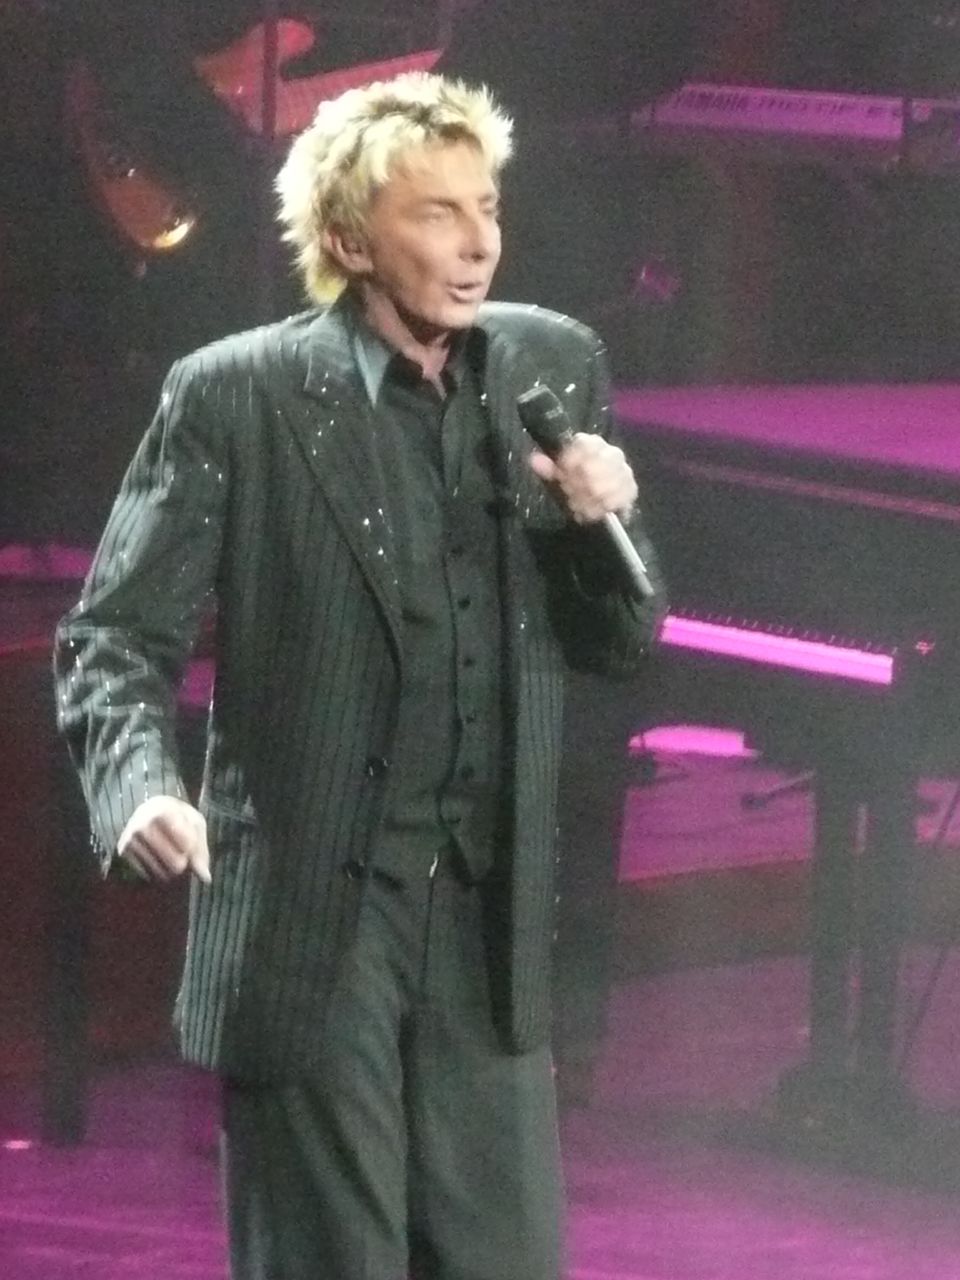 a man in a suit and tie standing on a stage